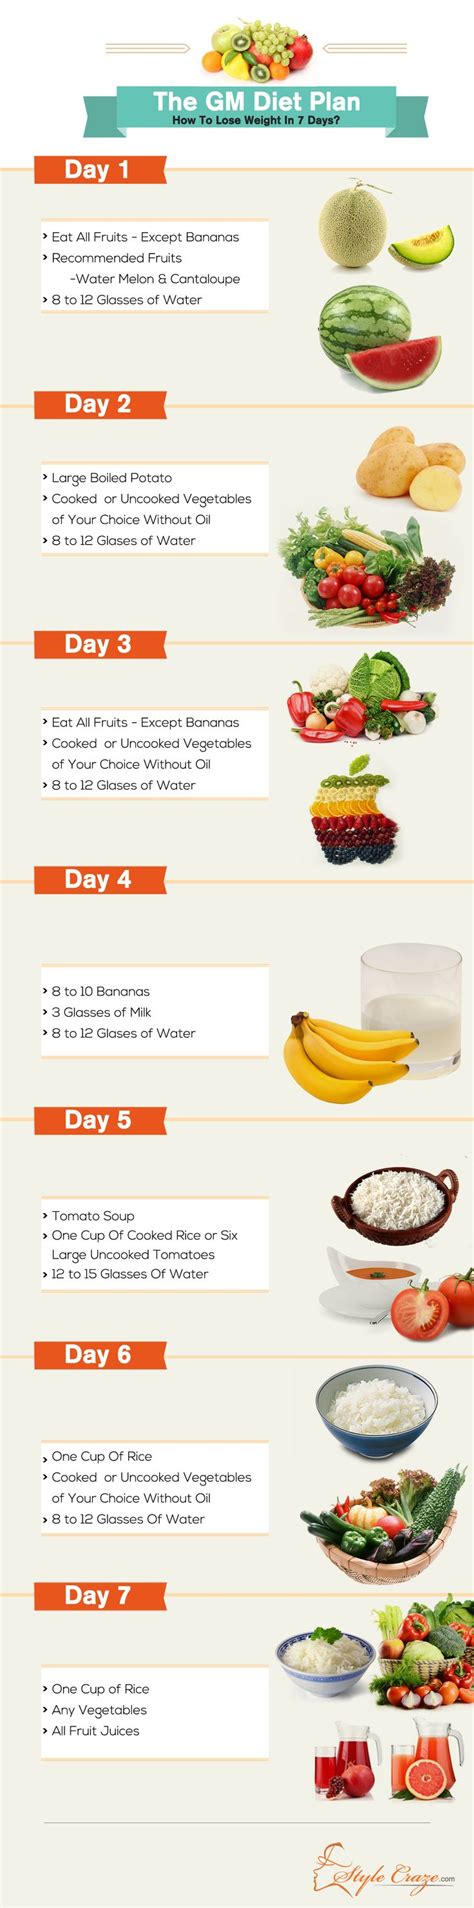 The GM Diet Plan: How To Lose Weight In Just 7 Days | Fat ...